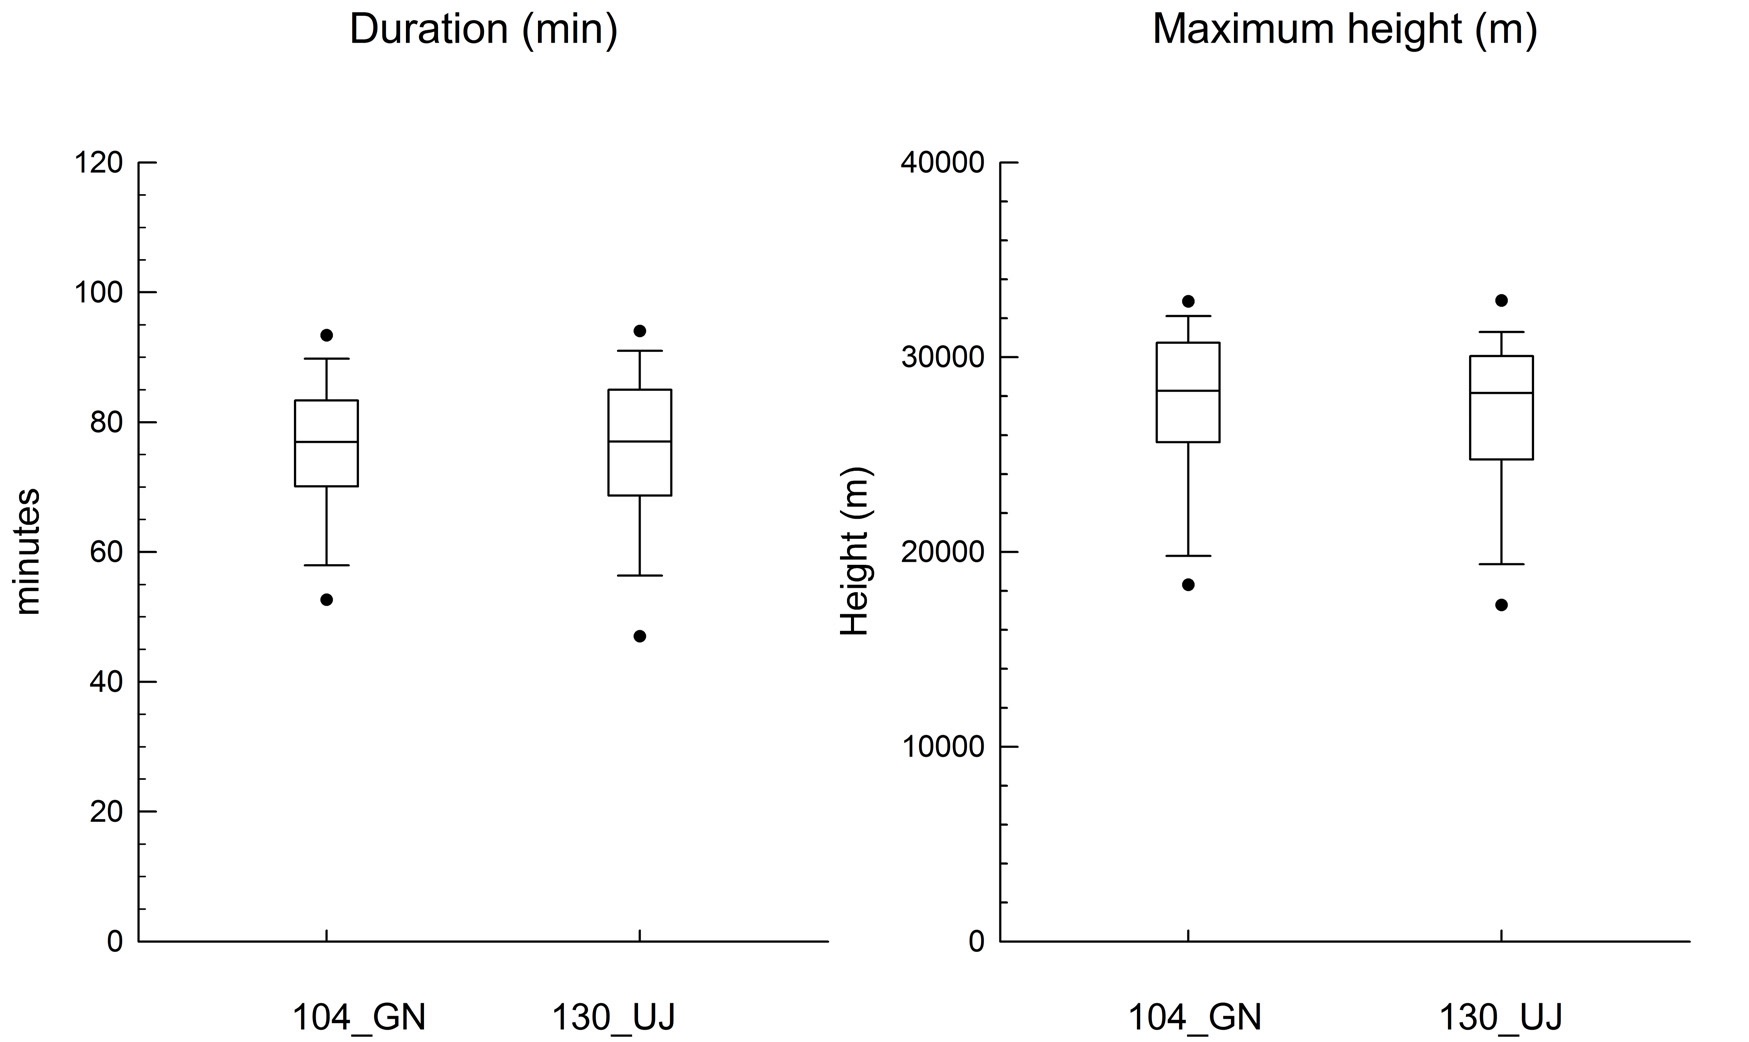 Fig. 4.2.3. The tailored box plot of duration and maximum height of radiosonde observation.